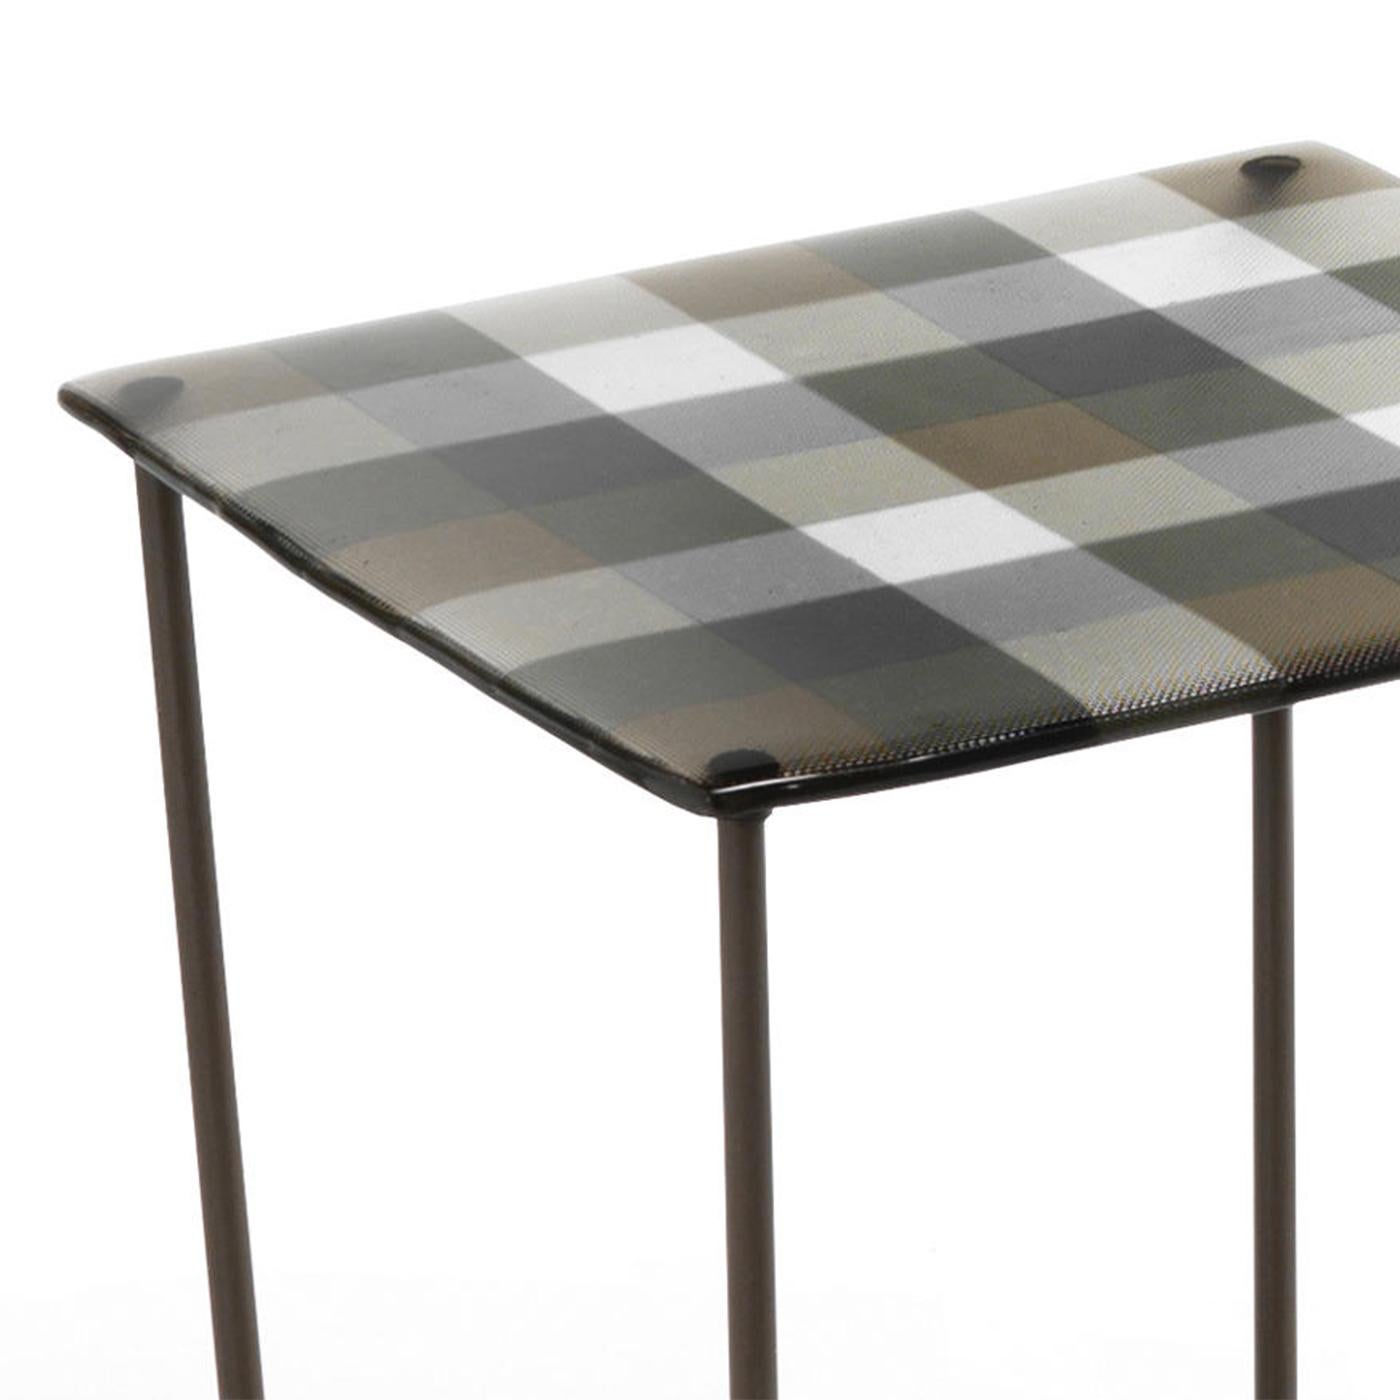 Side table Scottish with multicolored glass top
with tiles pattern and metal base opaque titanium finish.
Any slight trace and superficial depression, irregularity of 
the perimeter and small air bubble inside the glass sheet
are distinctive